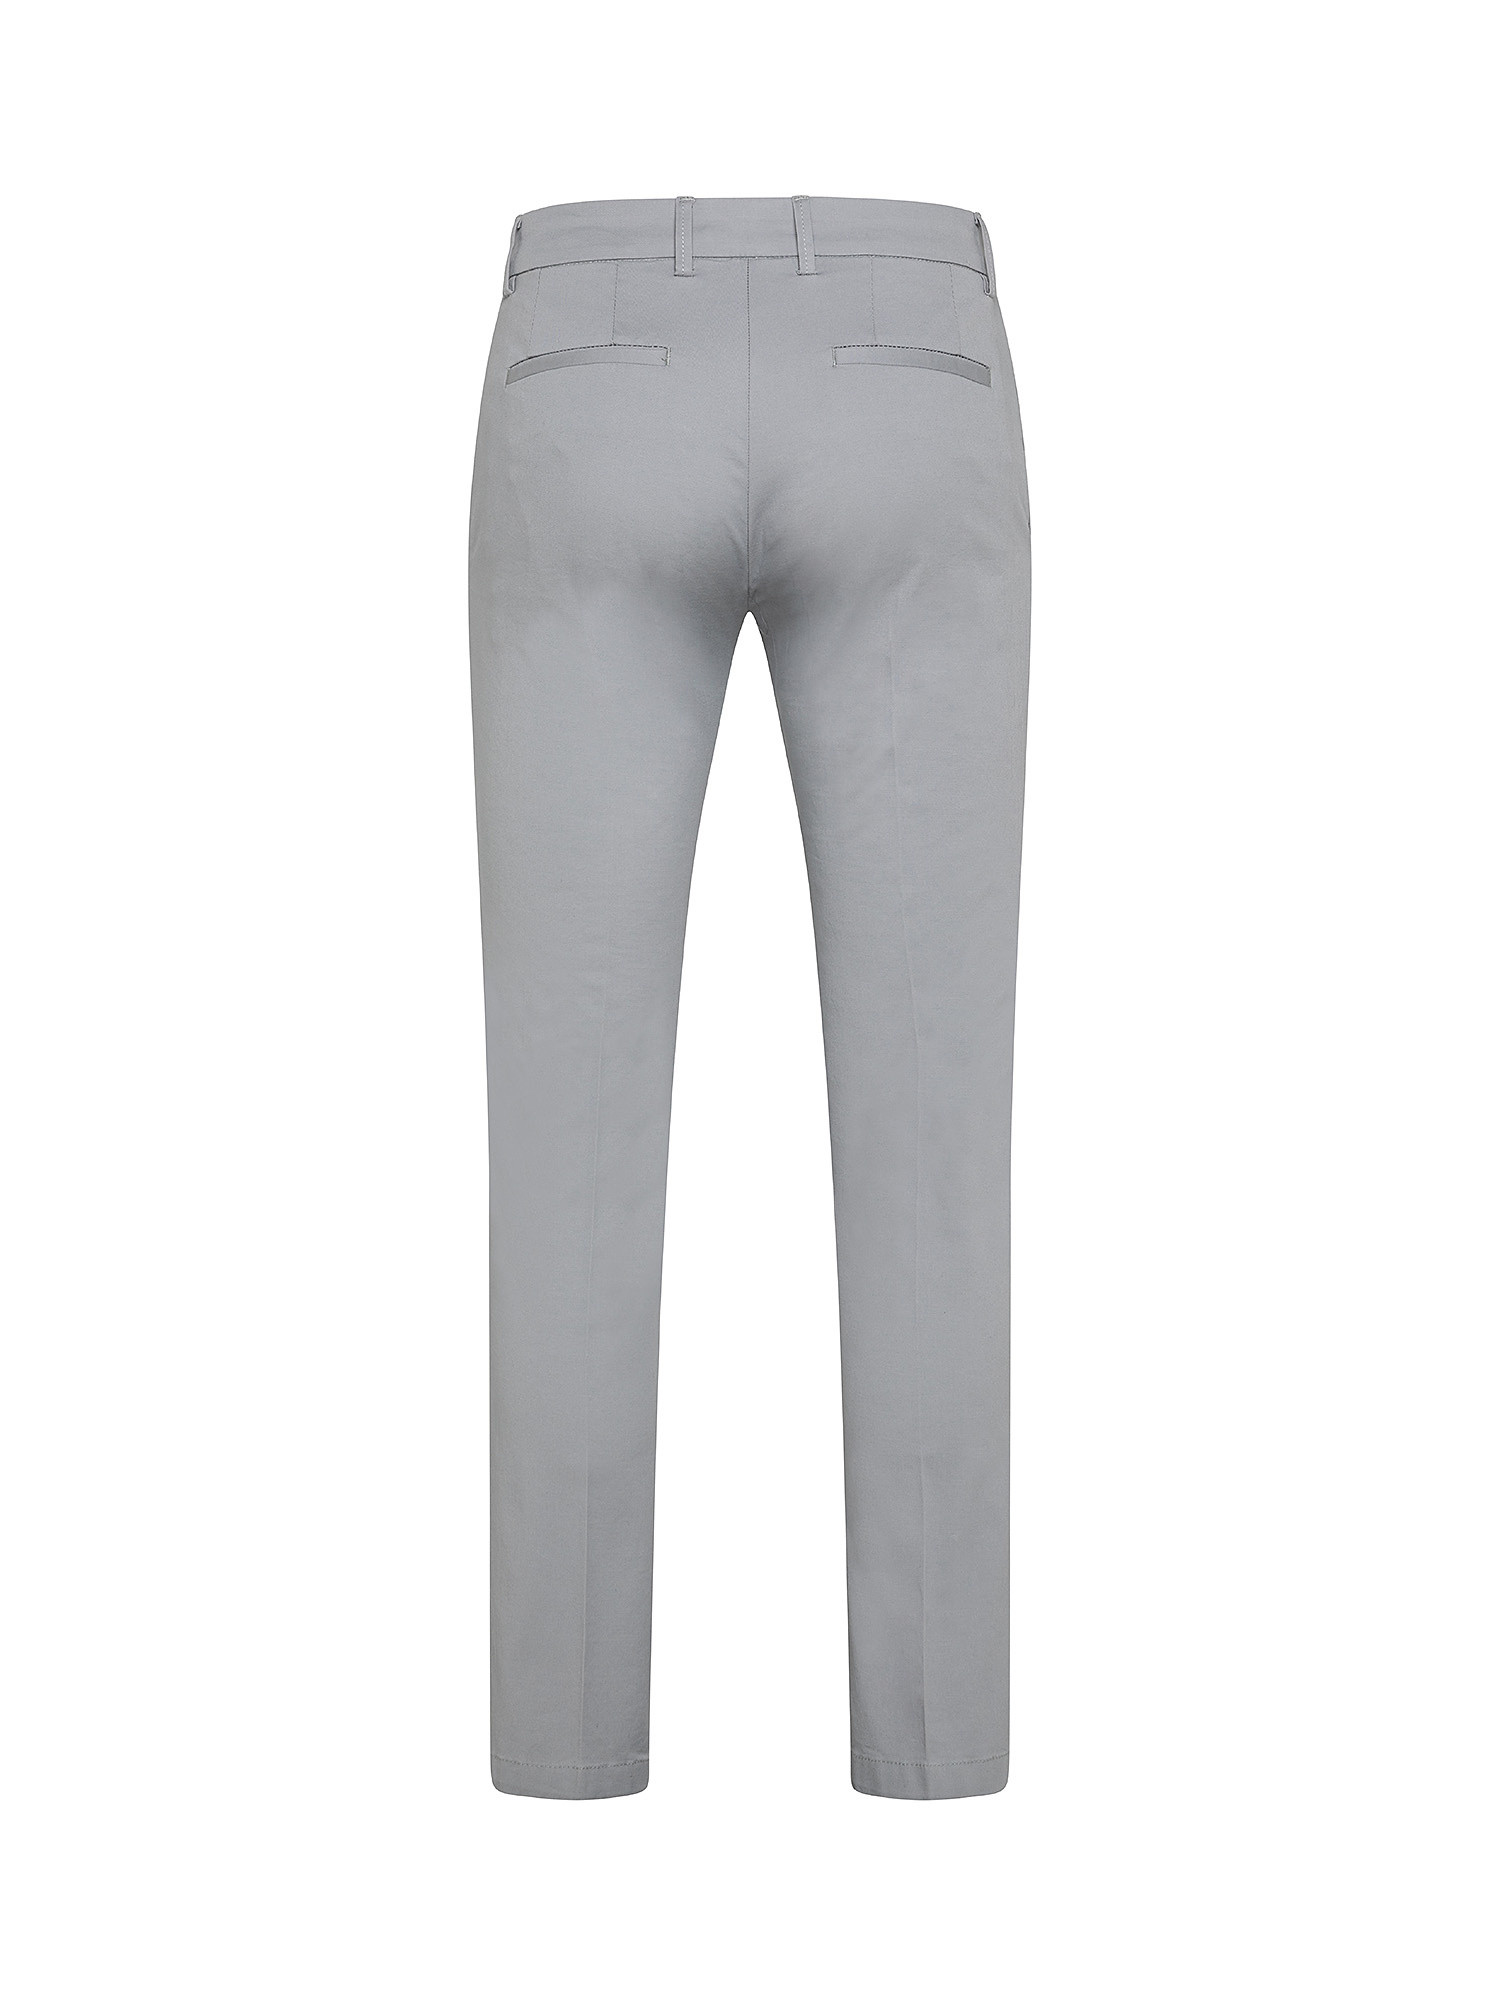 Chino trousers, Grey, large image number 1